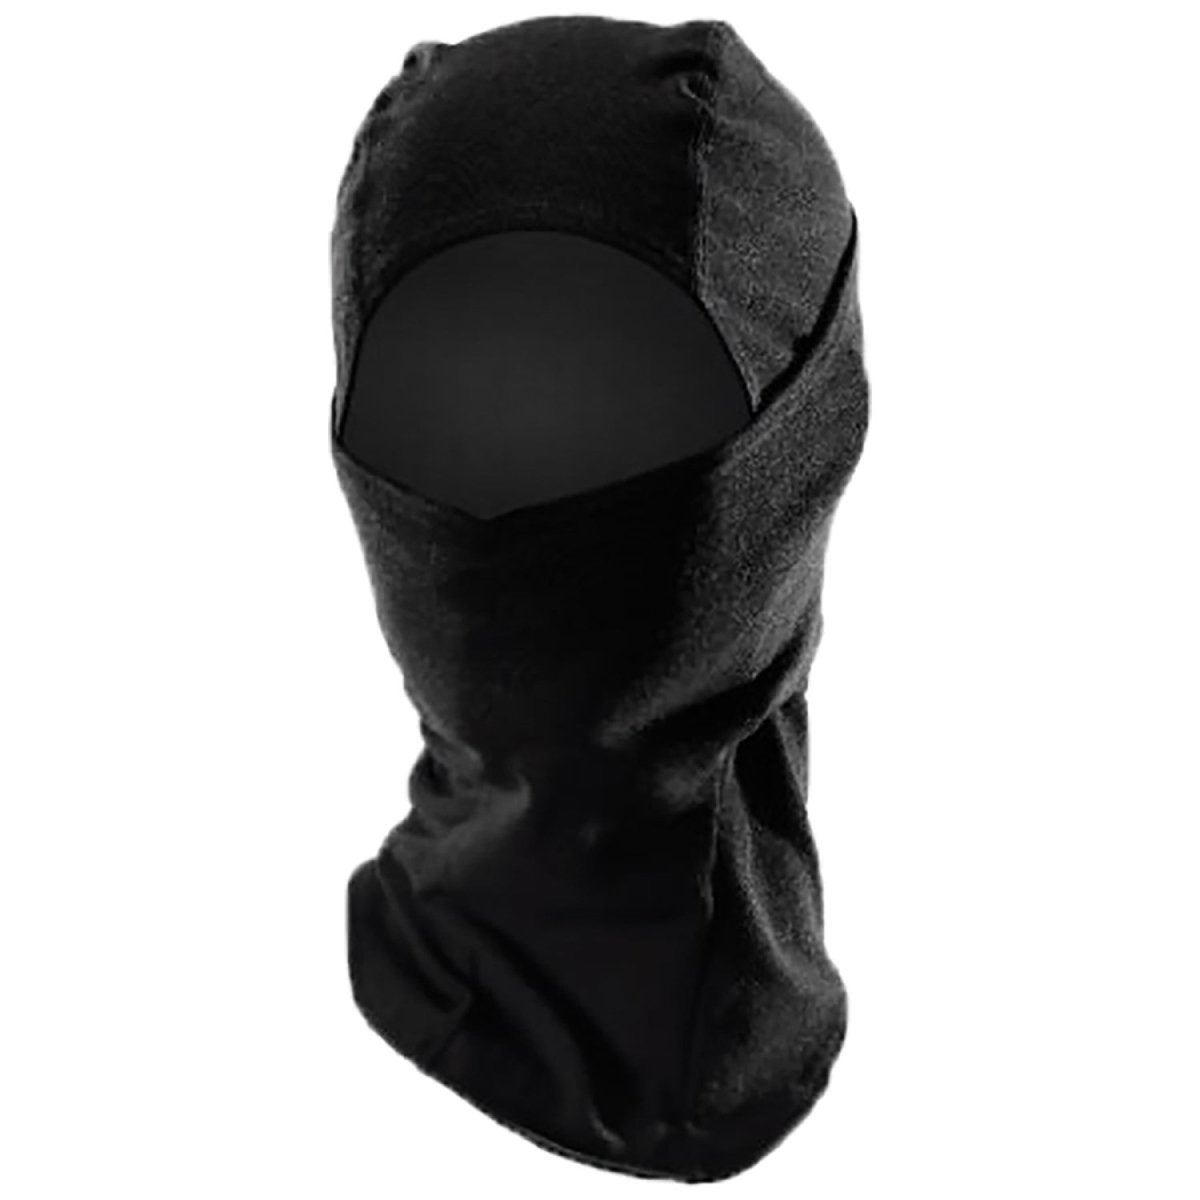 FR Balaclava for Hot Weather - Drifire Prime Arc Flash Resistant, X1  Safety